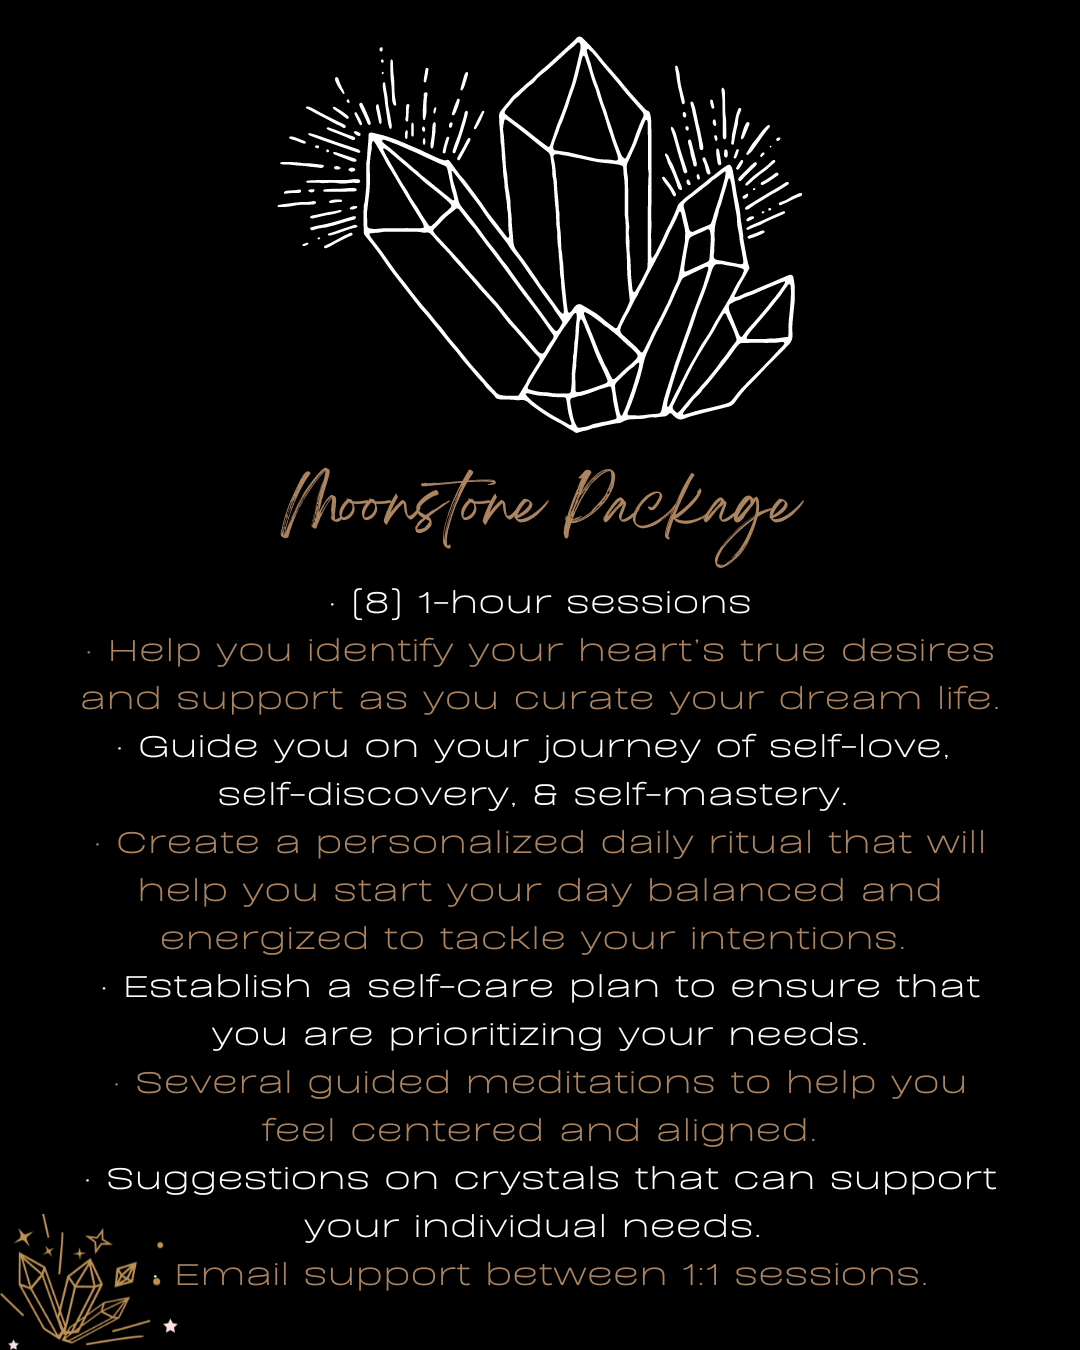 Life Coaching - Moonstone Package